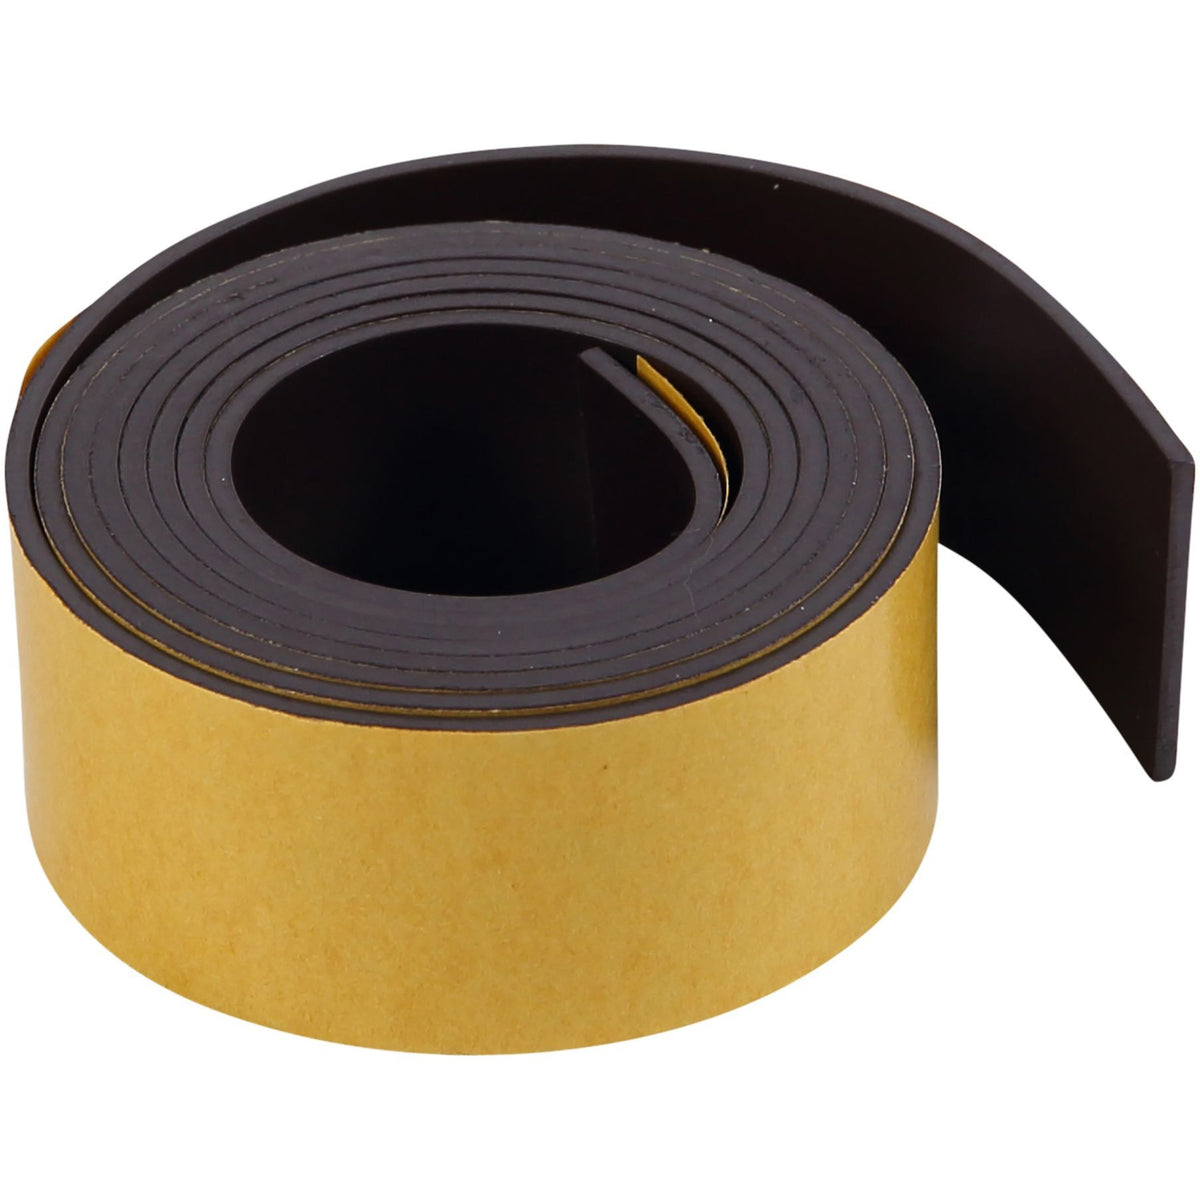 FM2020 Flexible Adhesive Magnetic Strip Tape Roll, 1" x 4' by MasterVision